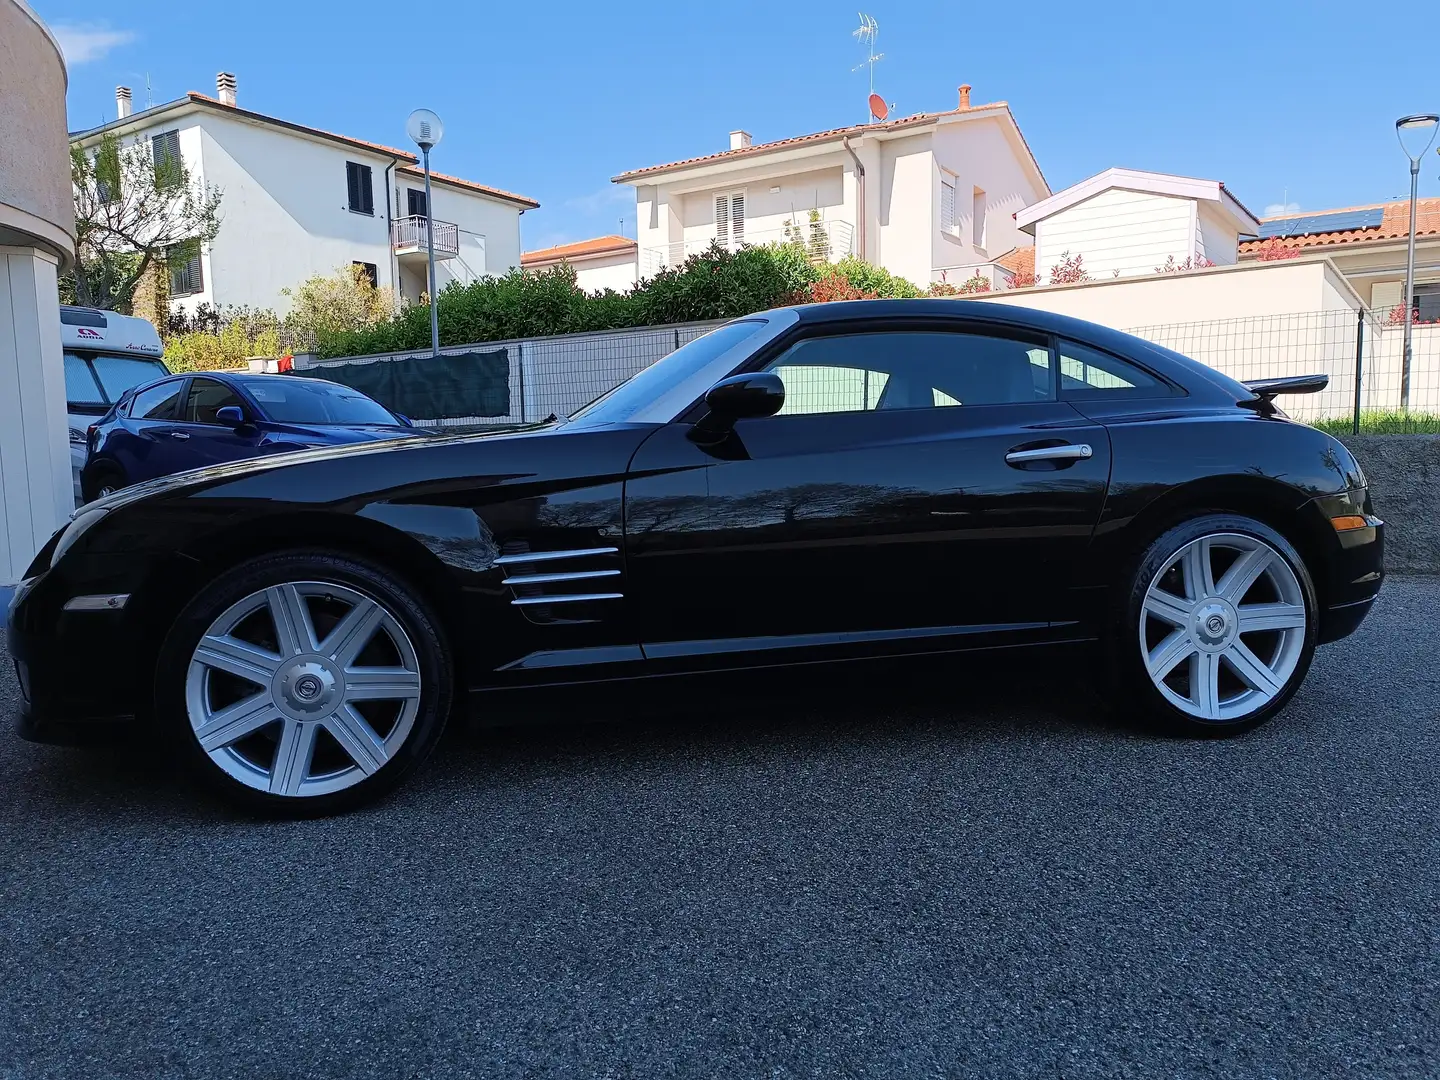 Chrysler Crossfire Crossfire Coupe Coupe 3.2 V6 SRT-6 auto crna - 2